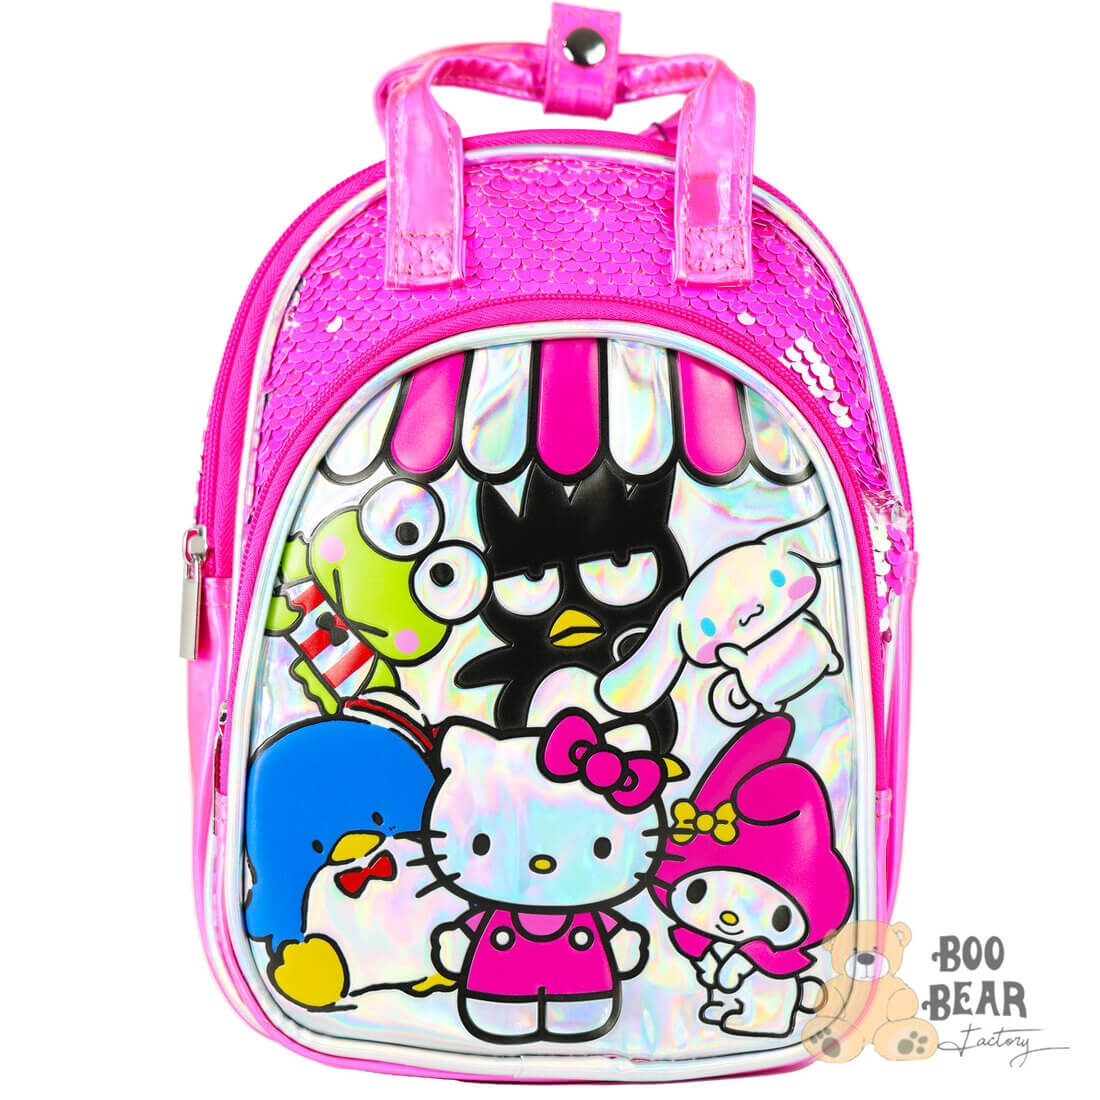 Hello Kitty and Friends Mini Backpack Pink Tote Bag Purse 